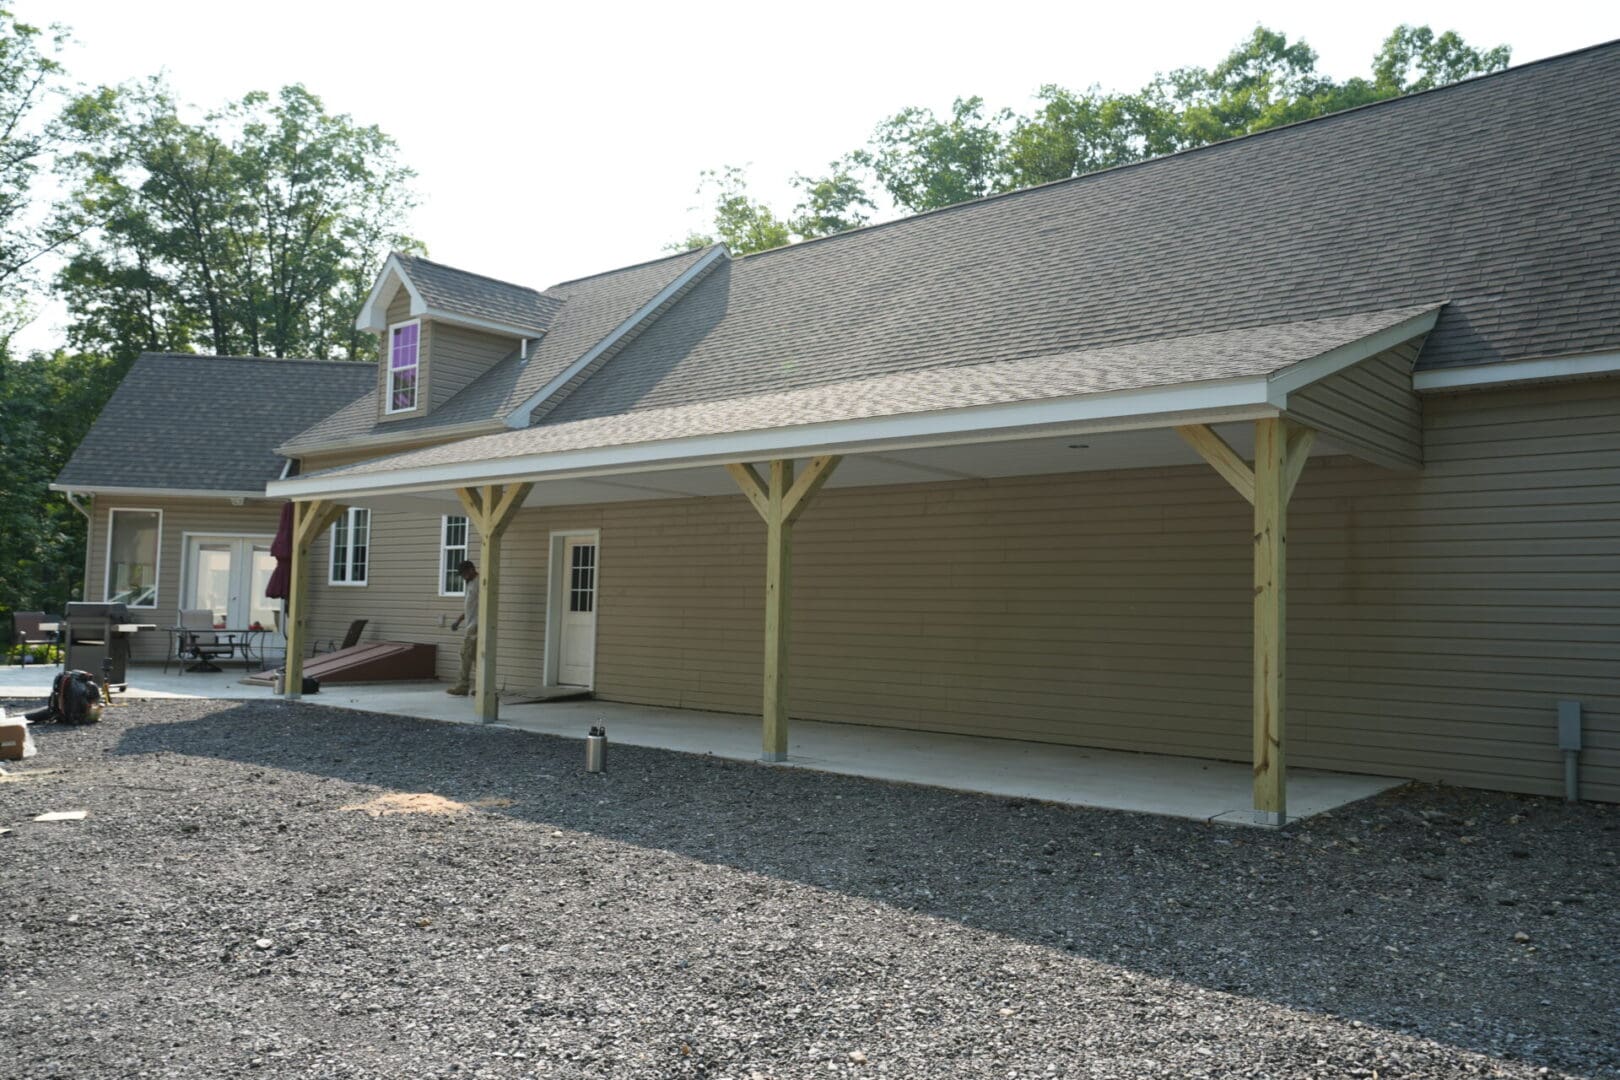 A custom home with a covered porch and a gravel driveway.